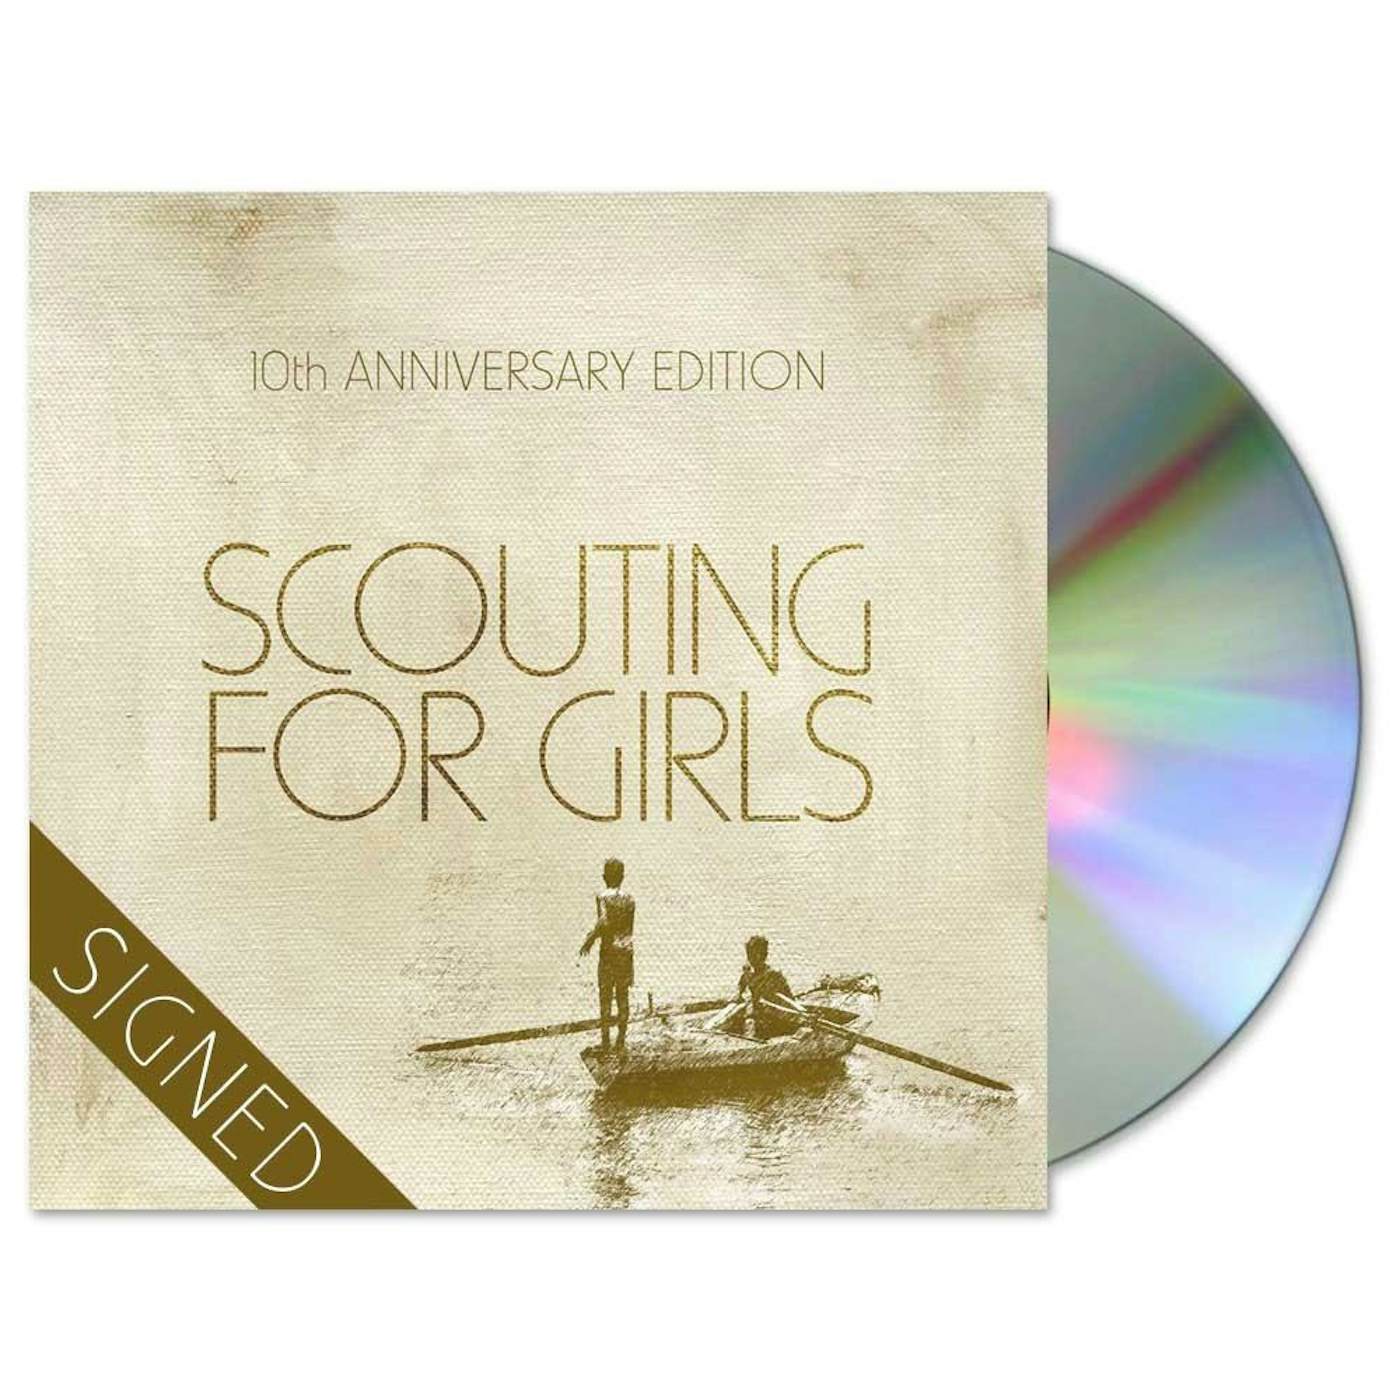 SCOUTING FOR GIRLS 10TH ANNIVERSARY EDITION - SIGNED 2CD